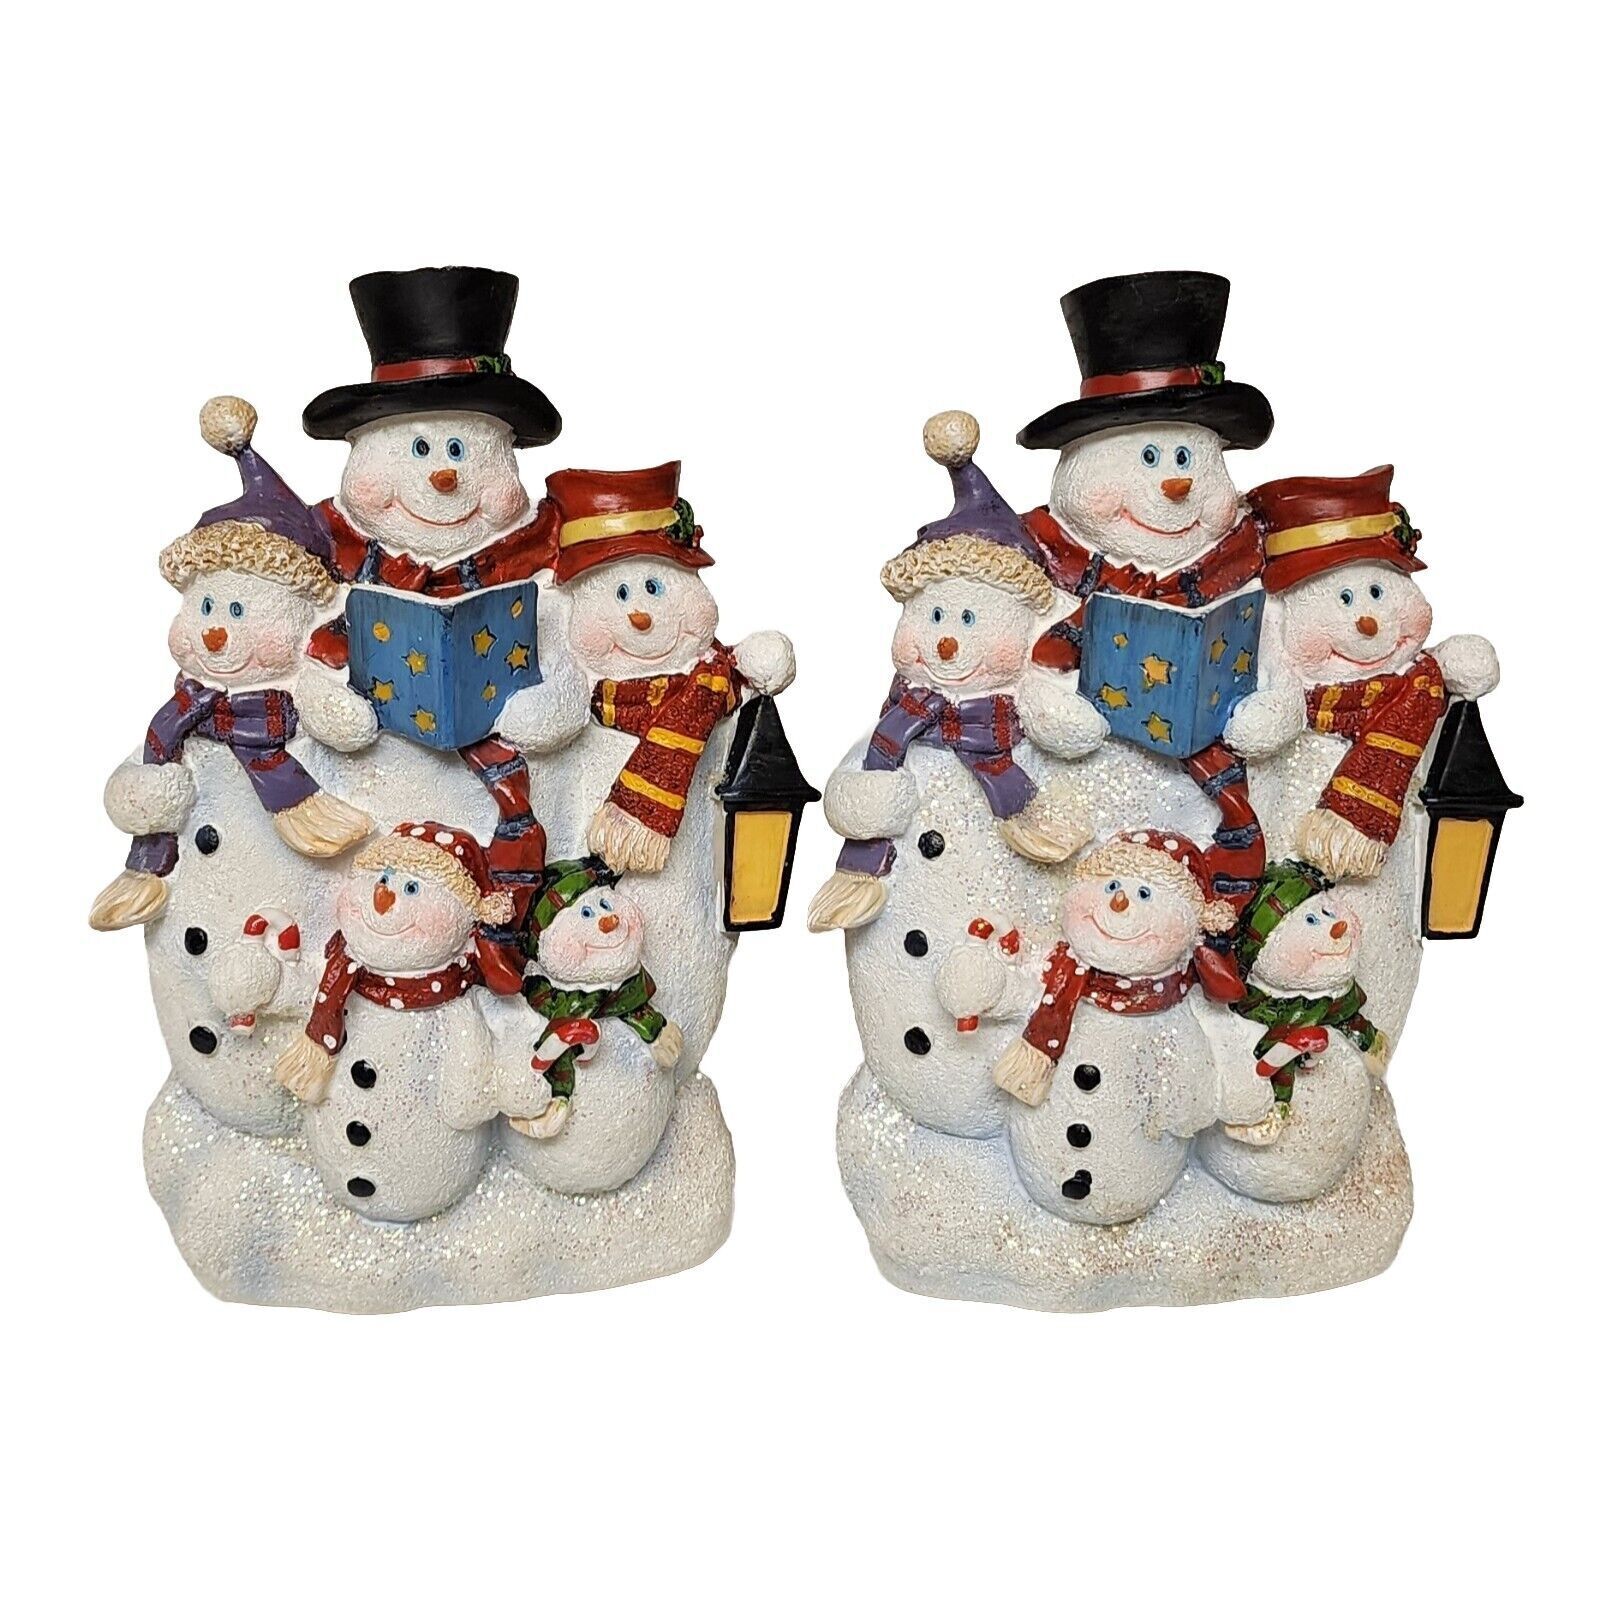 2 Christmas Snowman Stanley 6 Outlet Power Plug Adaptor removable face plate